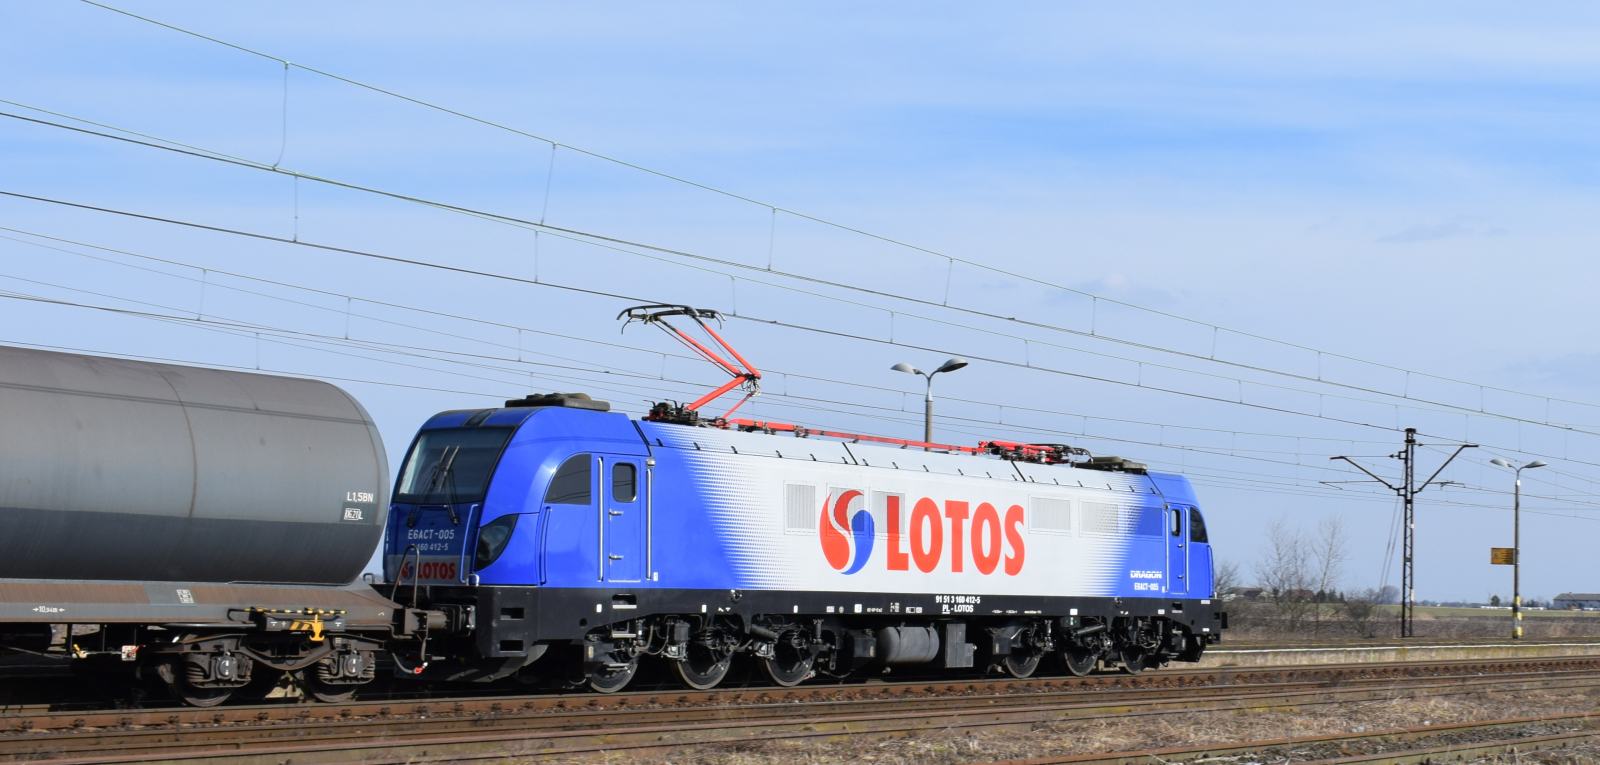 Lotos Kolej E6ACT-005 in March 2018 with a tank train